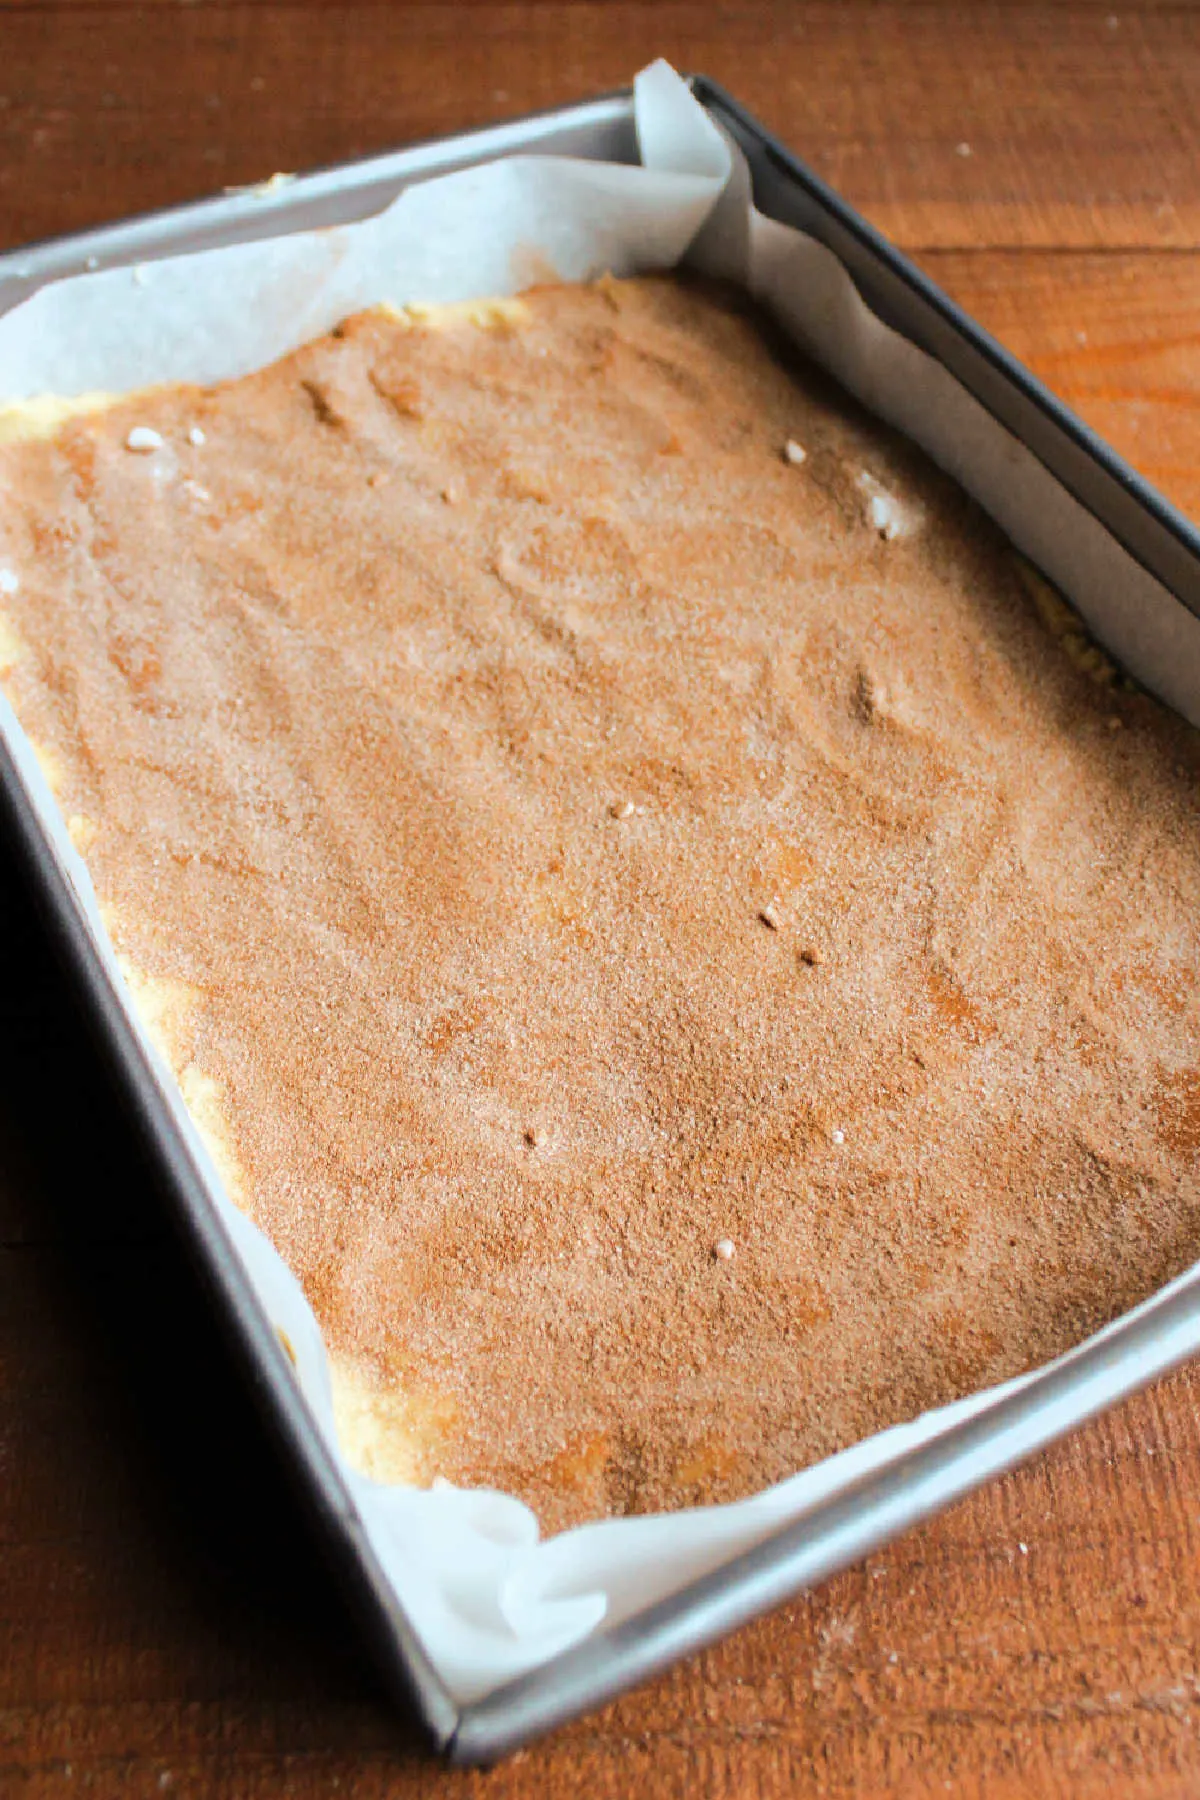 9x13-inch pan lined with parchment paper and filled with cinnamon sugar topped snickerdoodle dough, ready to bake.